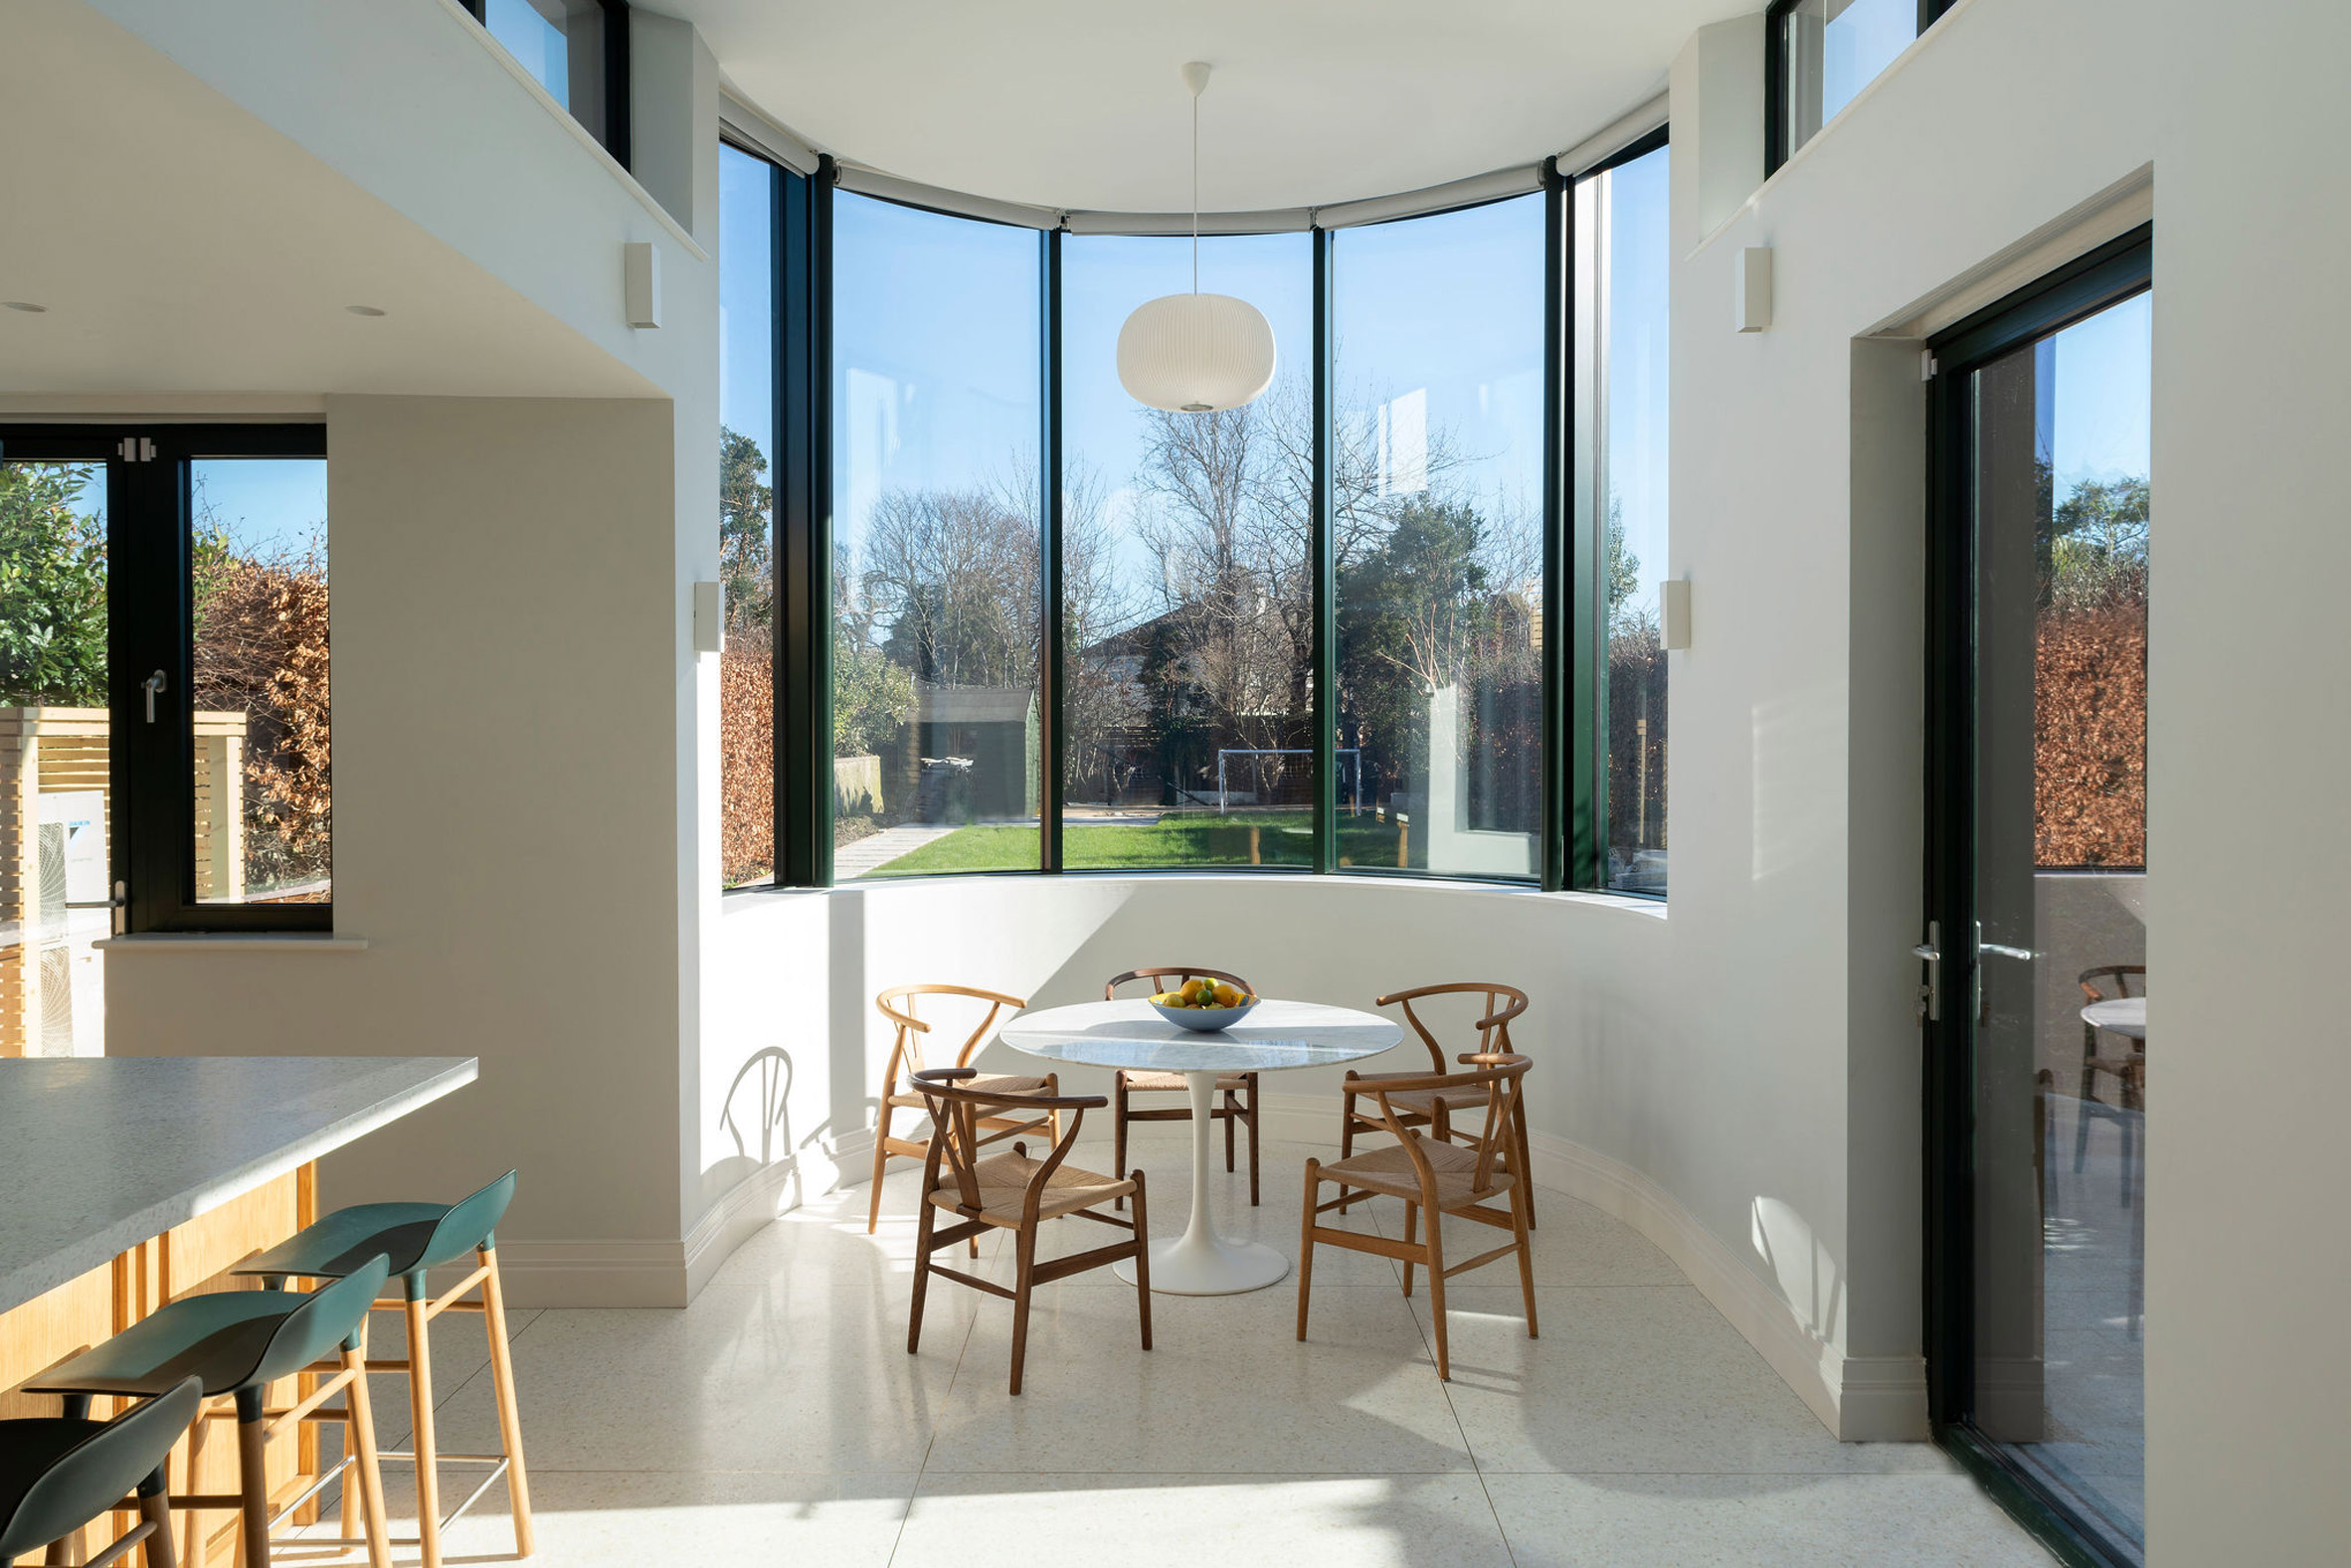 Churchtown by Scullion Architects